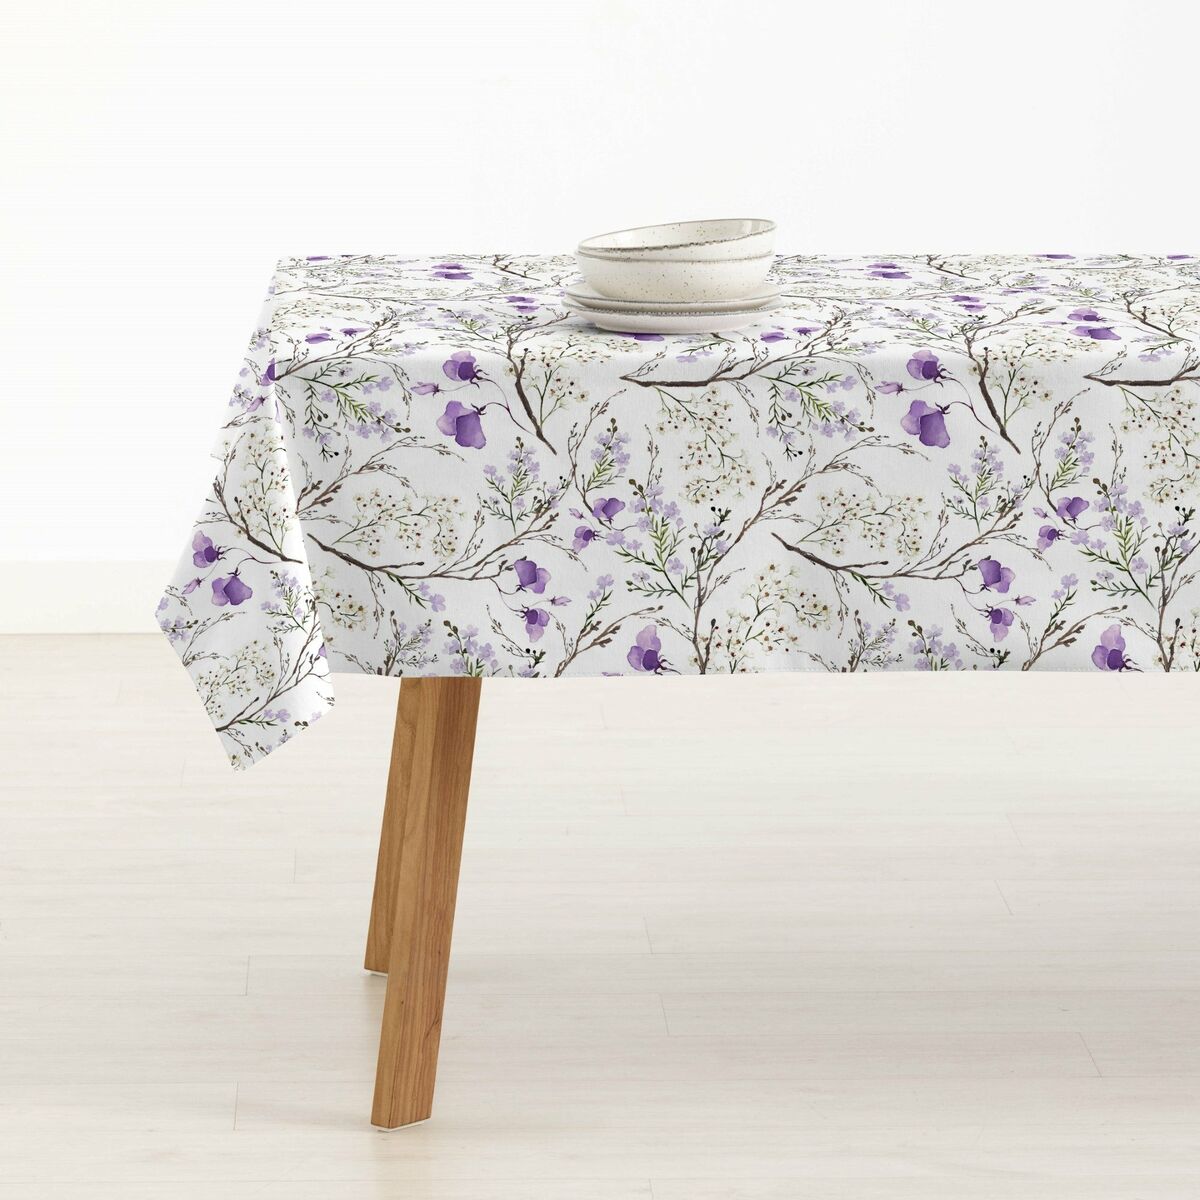 Stain-proof tablecloth Belum 0120-374 100 x 140 cm